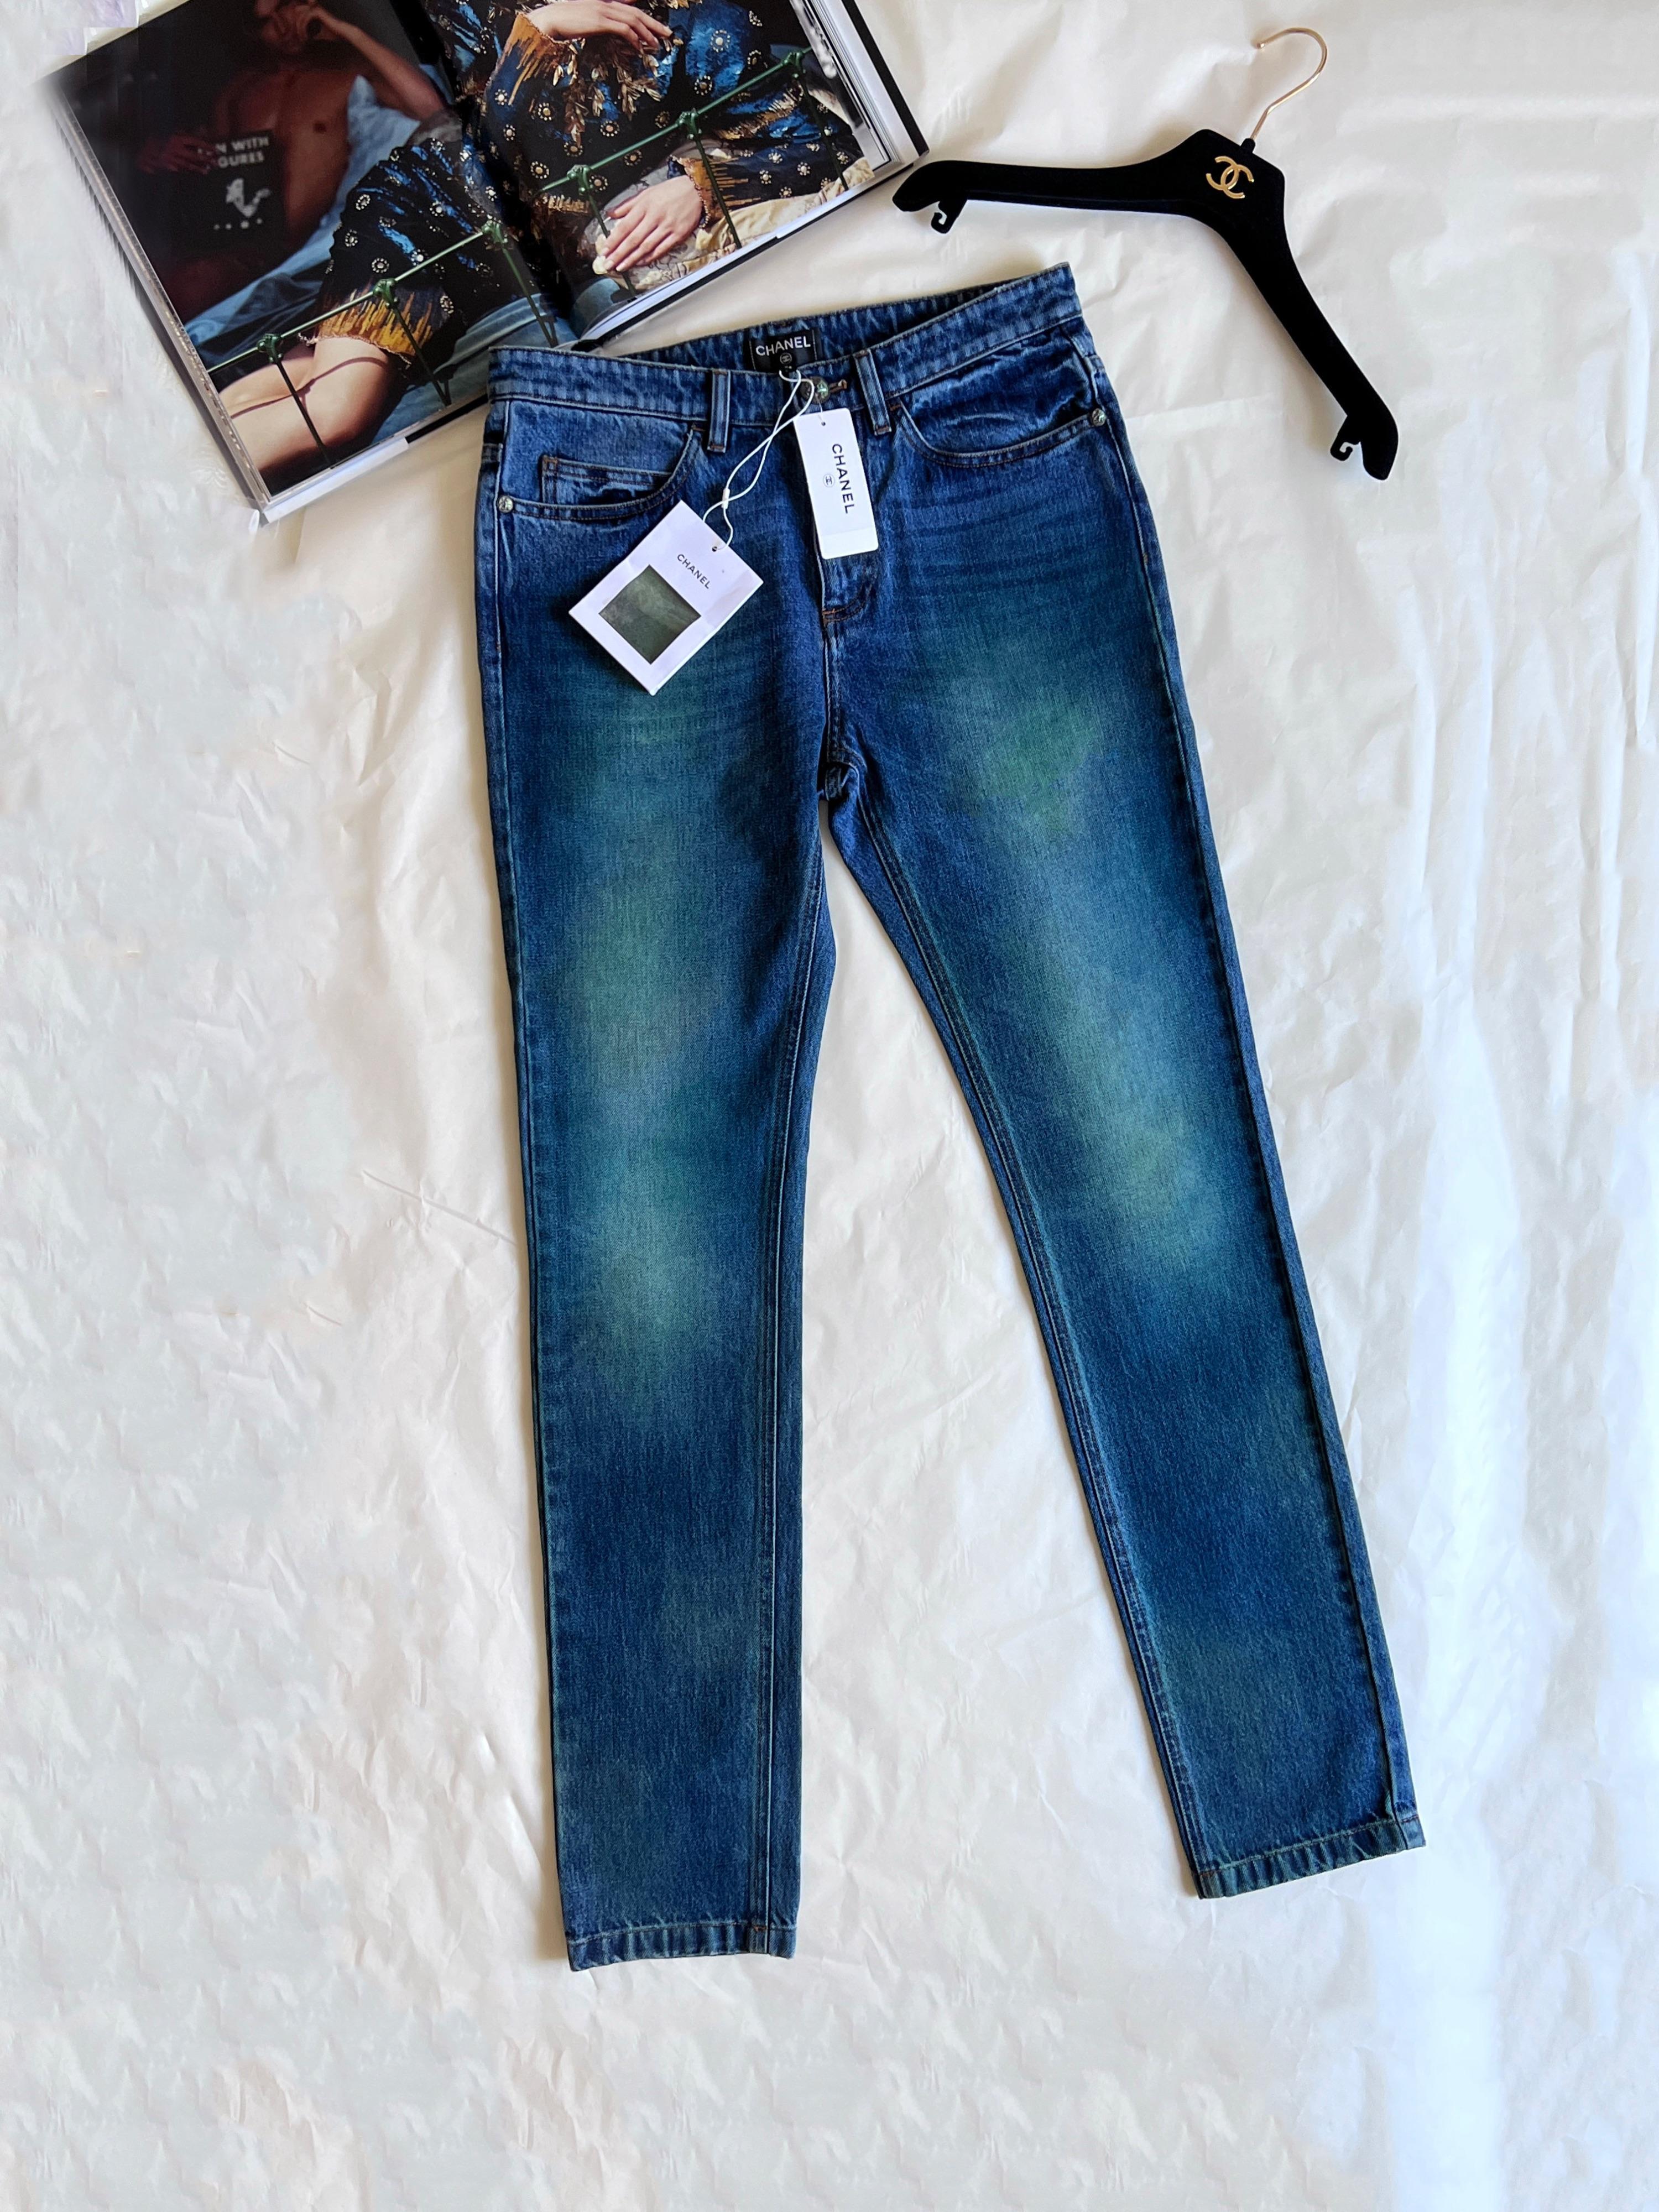 New Chanel jeans from Runway of Paris / CUBA 2017 Cruise collection.
- blue washed denim with green fading traces - looks great in person!
- CC logo ''Coco Cuba'' buttons and studs
Size mark 42 fr.
Condition: NEW, Tags attached (including price tag